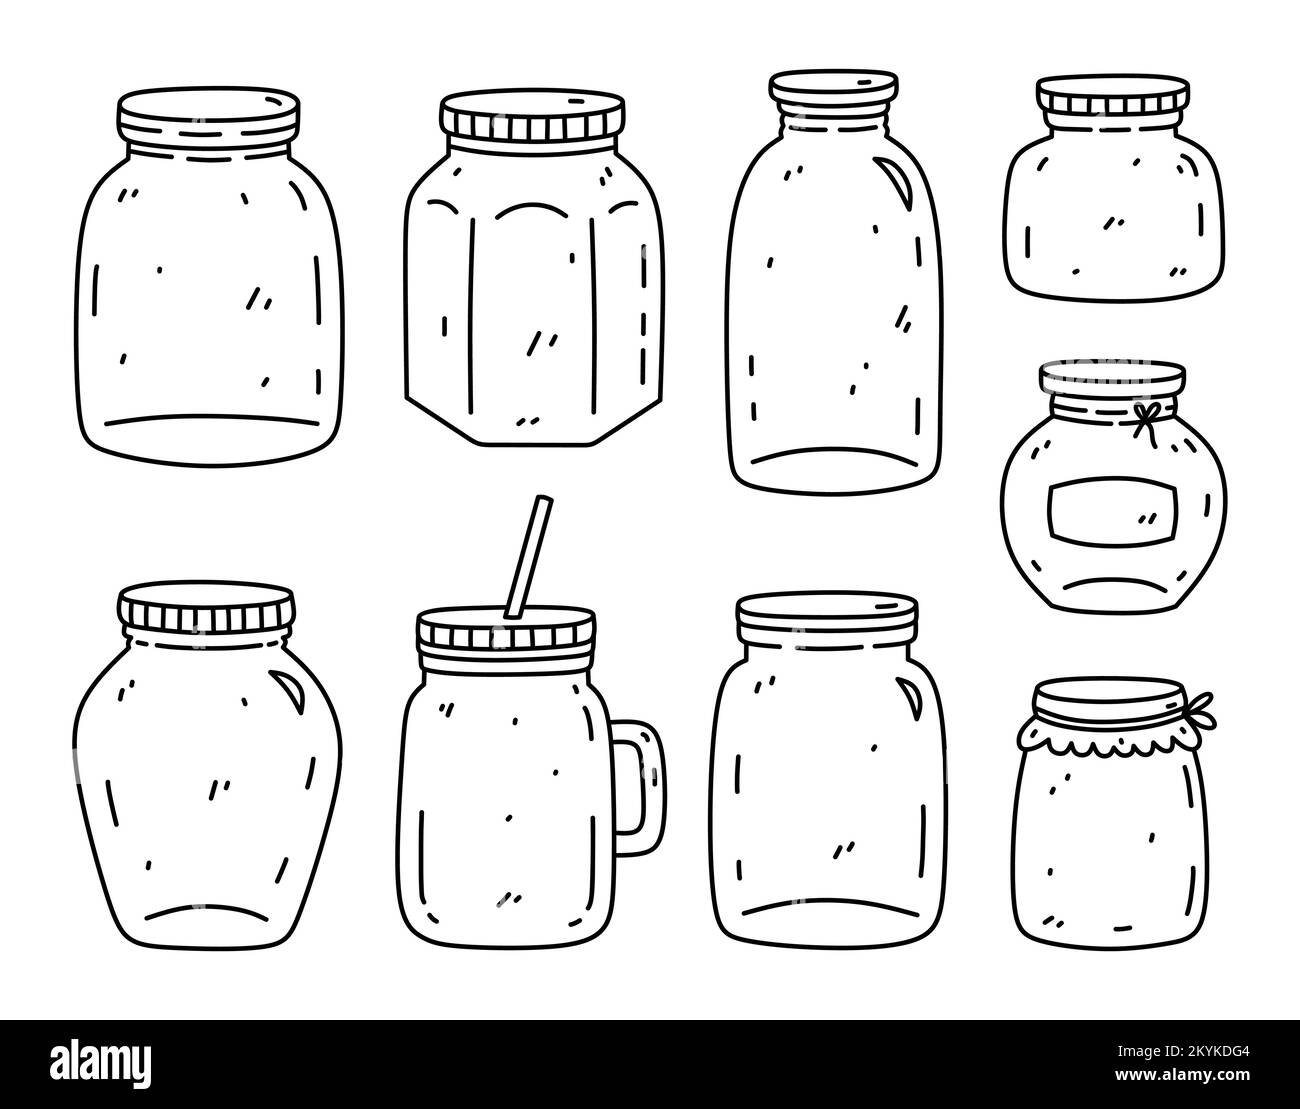 A set of glass jars of different shapes isolated on white background. Utensils for canning, jam, drinks. Vector hand-drawn illustration in doodle style. Perfect for decorations, logo, various designs. Stock Vector